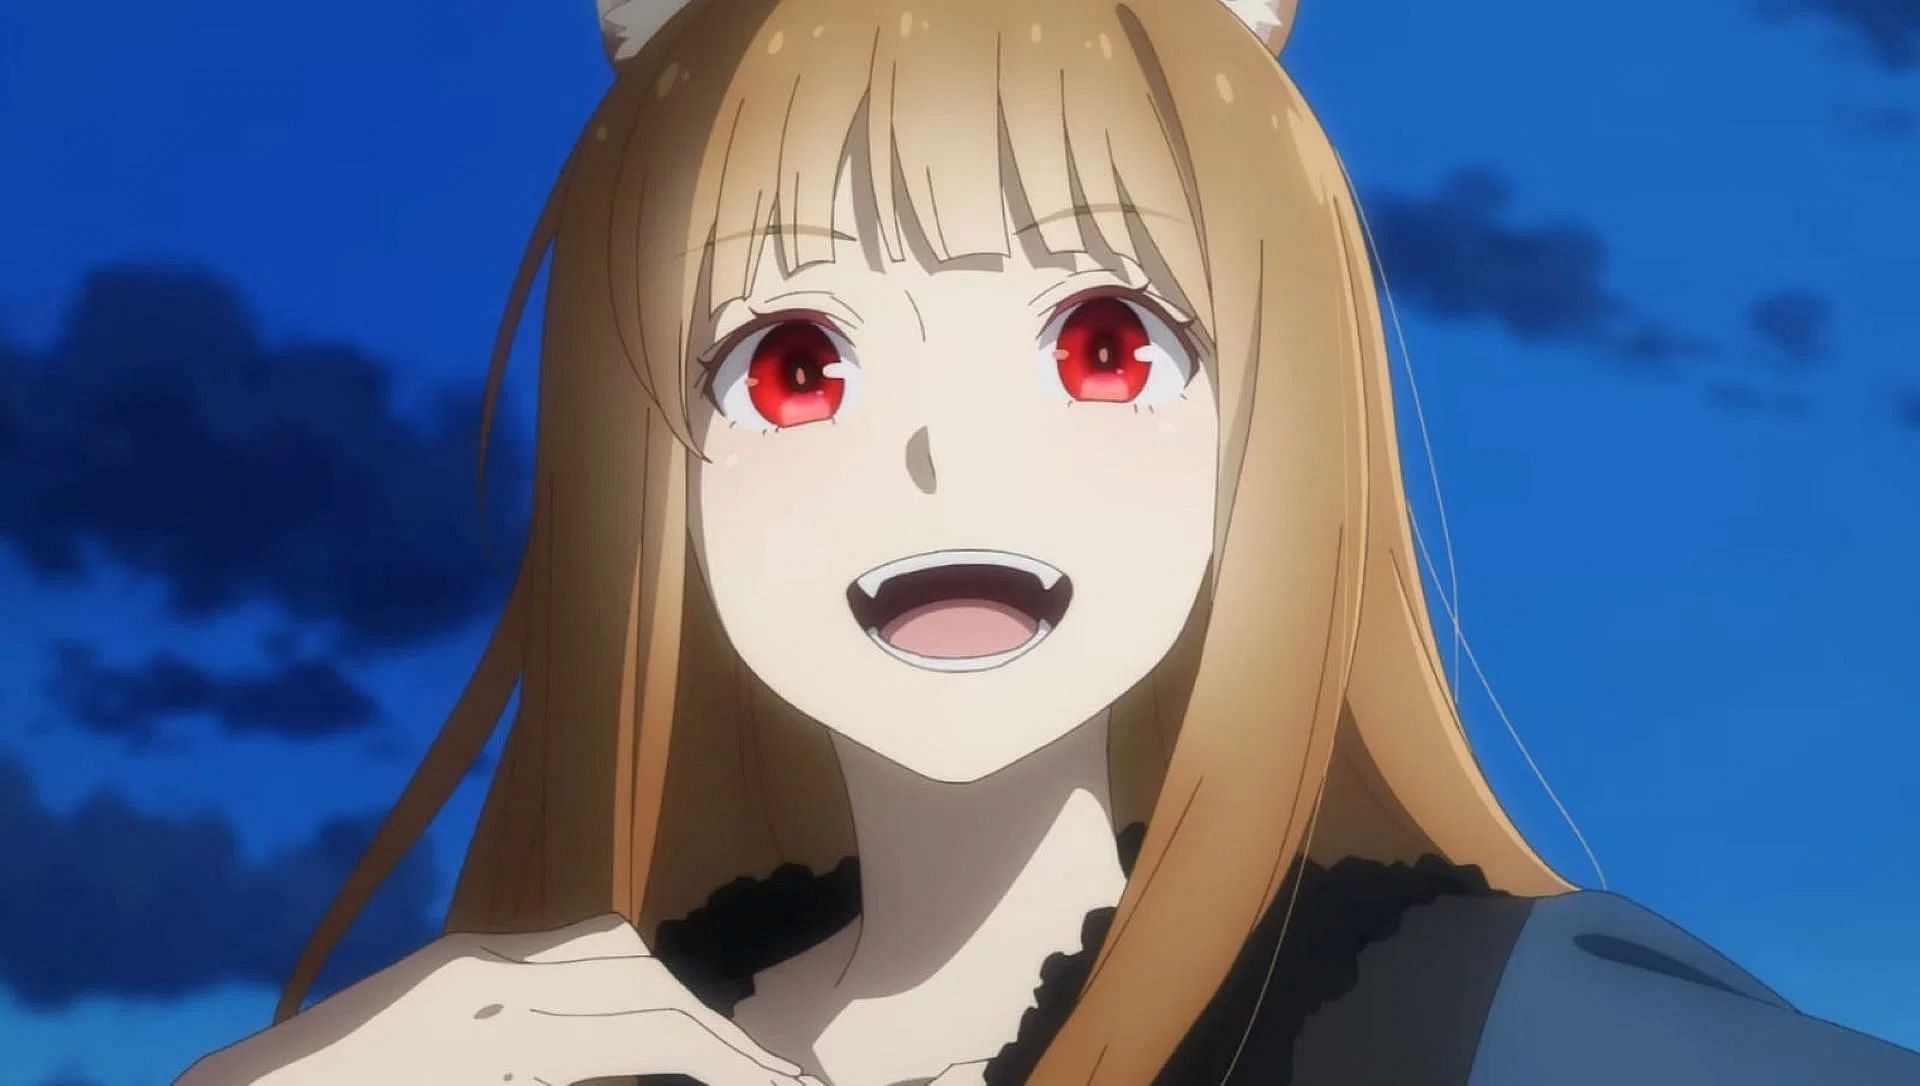 Holo, as seen in Spice and Wolf: Merchant Meets the Wise Wolf anime (Image via Studio Passione)